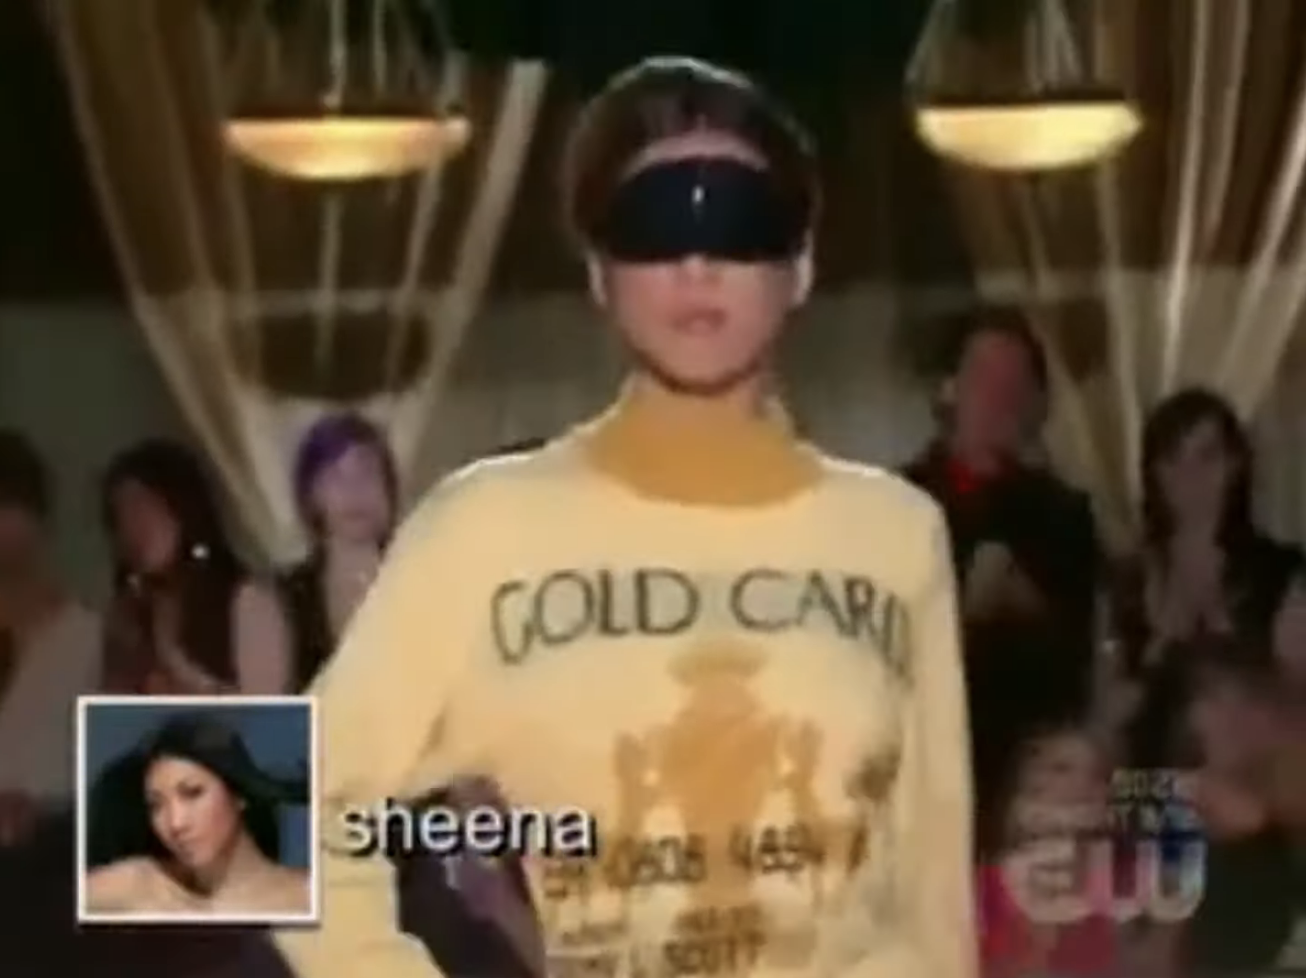 A contestant walks down the runway blindfolded